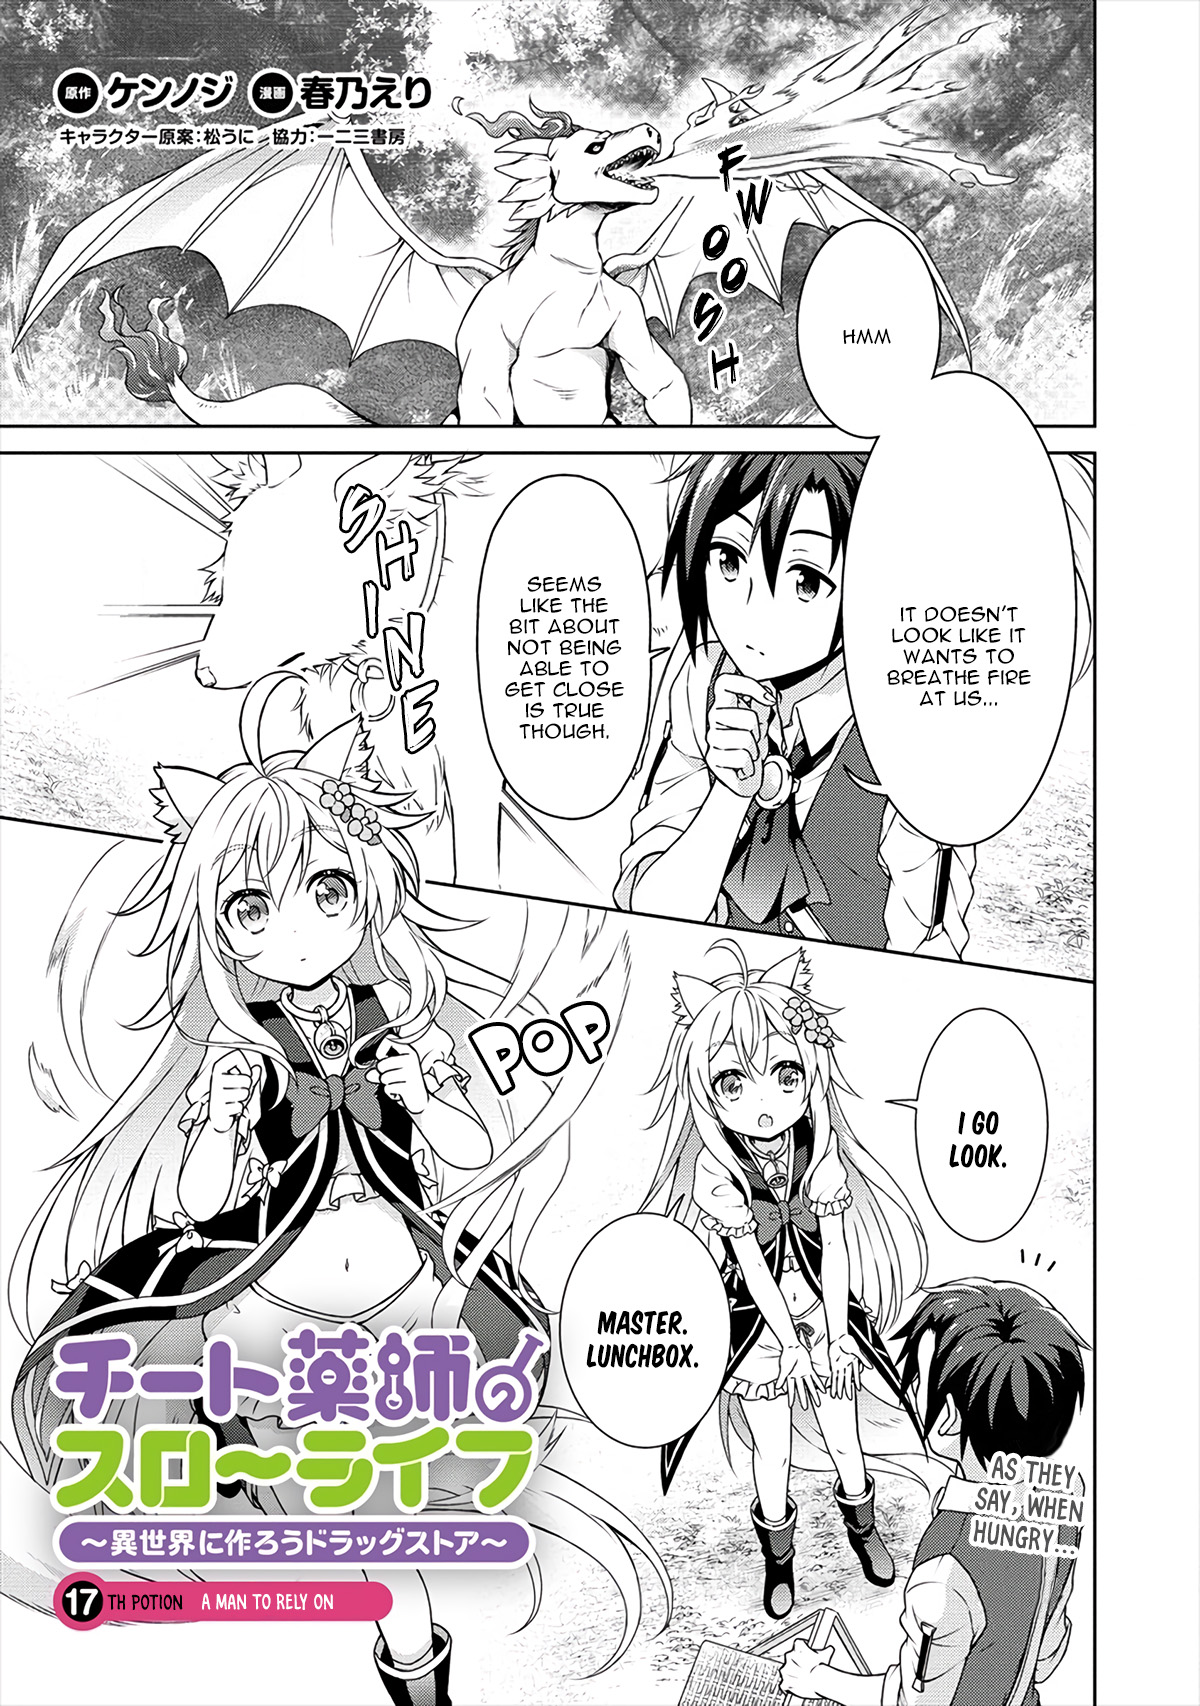 Cheat Kusushi No Slow Life: Isekai Ni Tsukurou Drugstore Vol.4 Chapter 17.1: A Man To Rely On (Part 1) - Picture 2